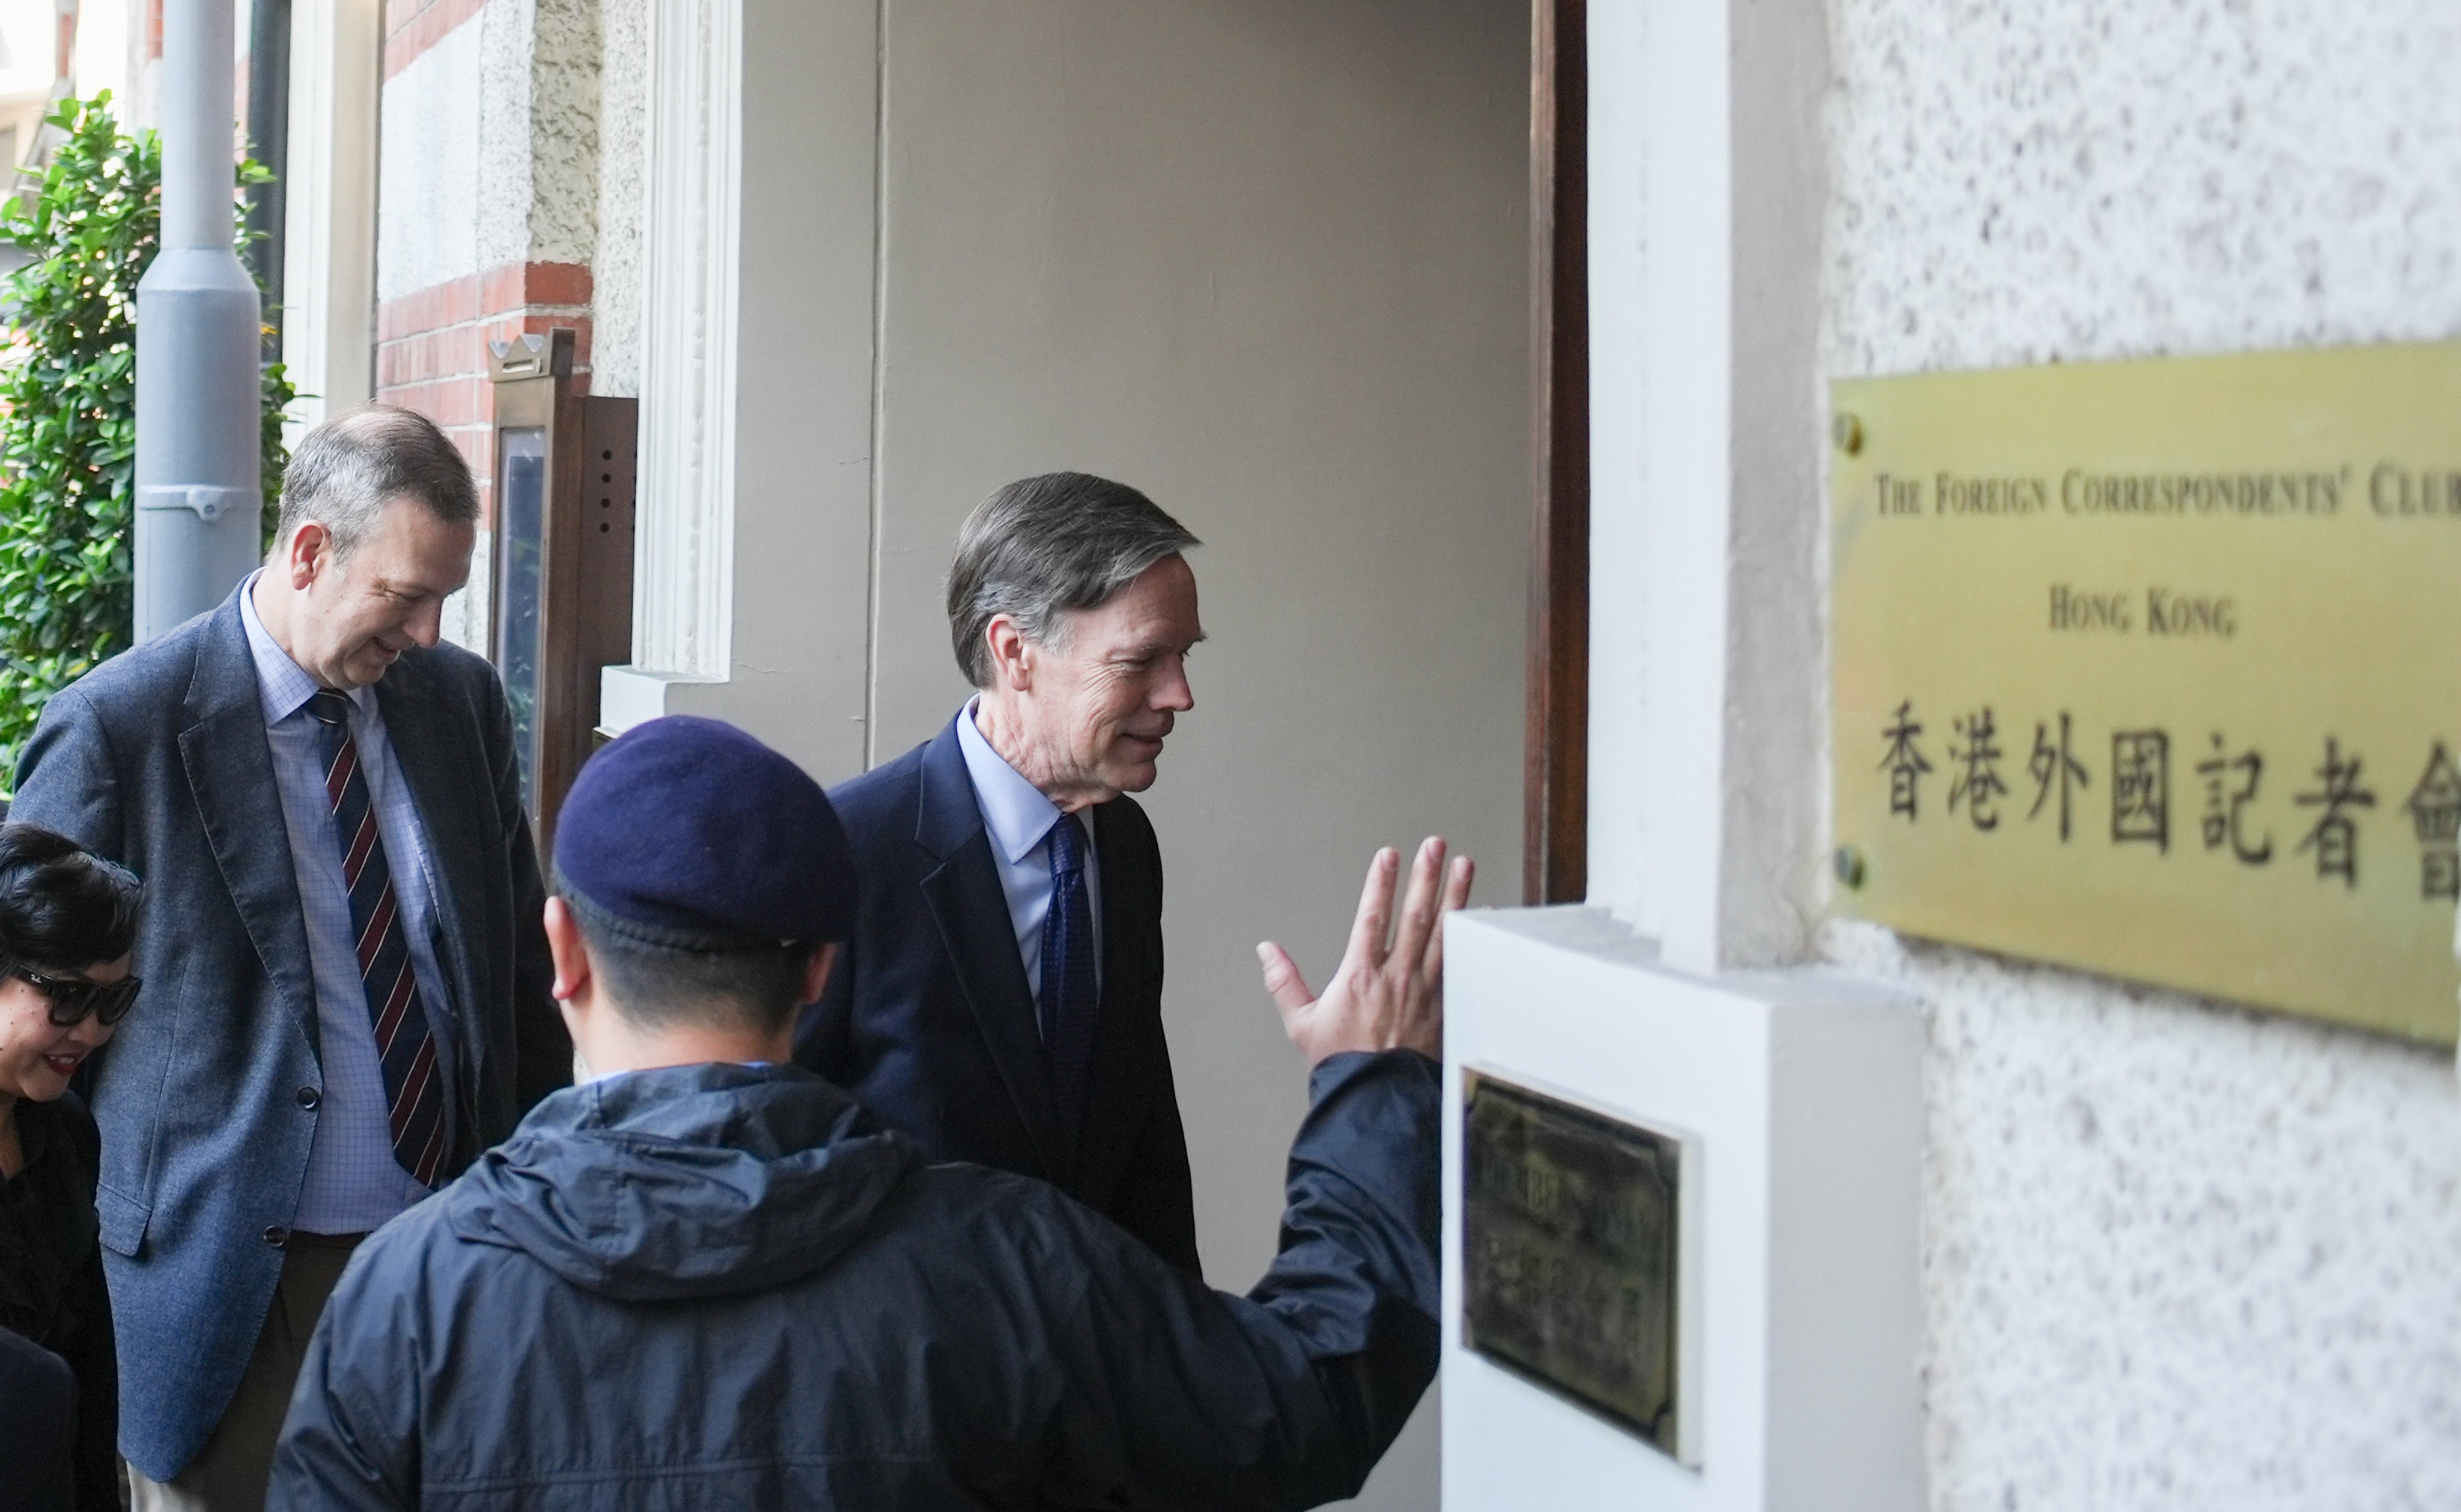 Nicholas Burns (right), US ambassador to China, visits the Foreign Correspondents’ Club for an off-the-record, closed-door session. Photo: Eugene Lee